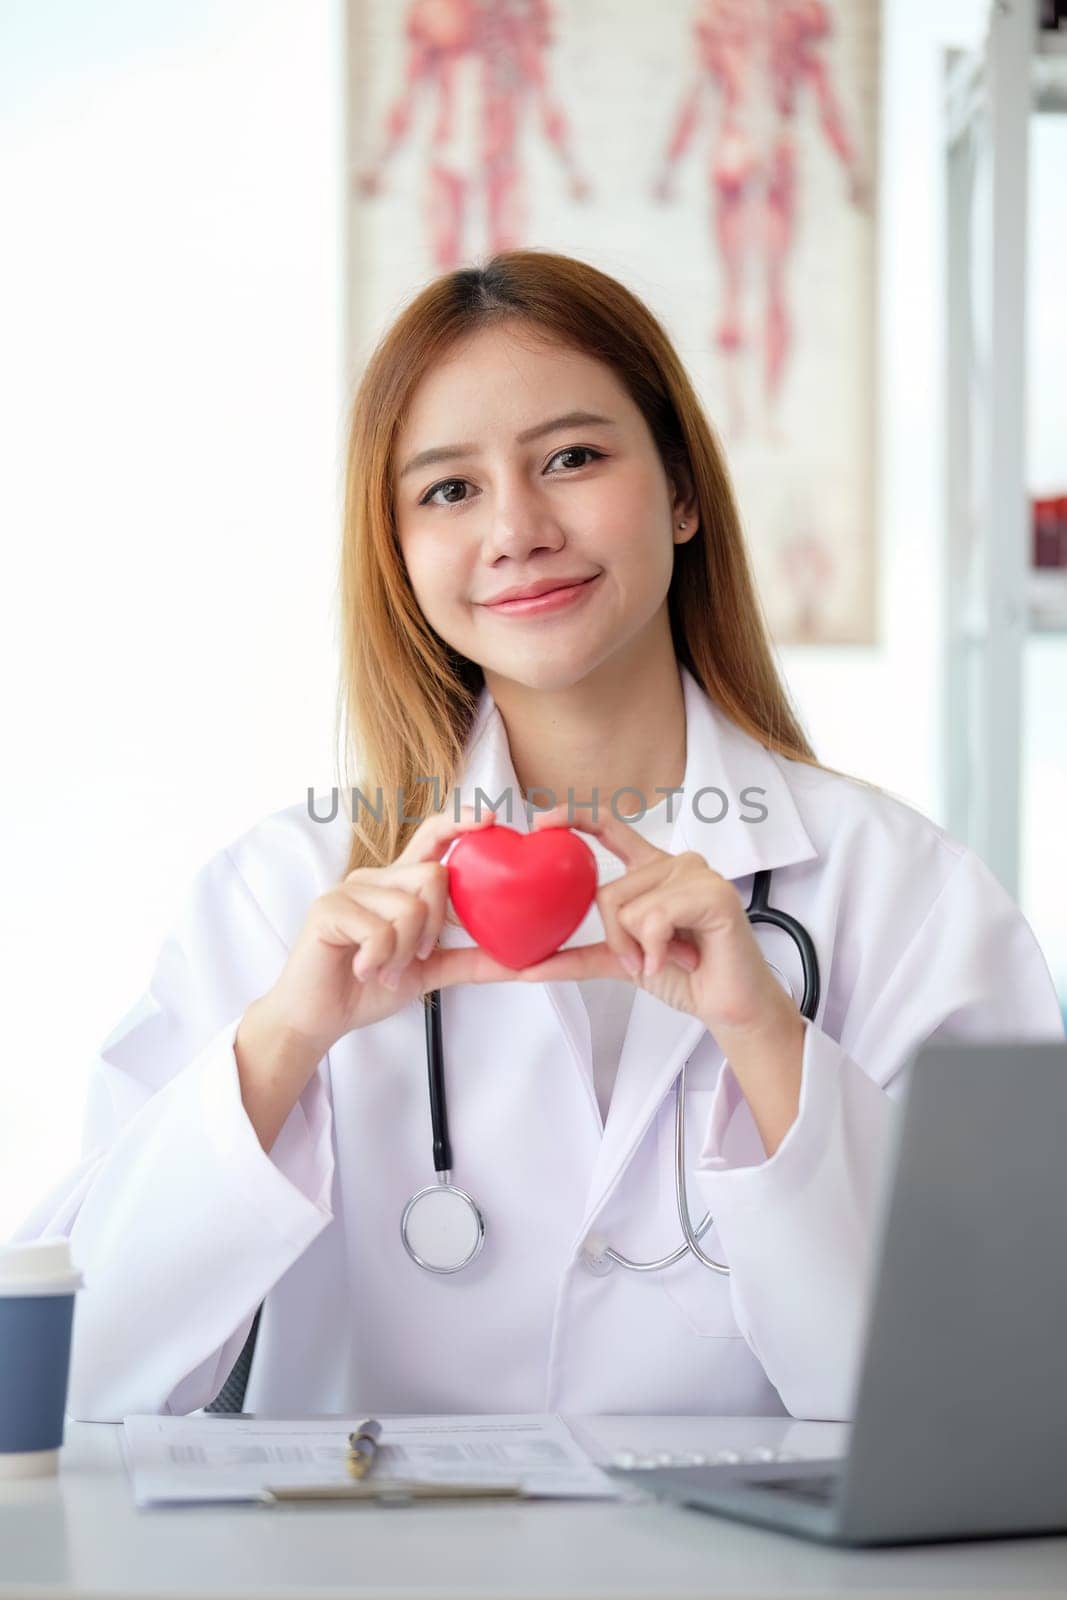 Happy young doctor woman holding red heart shape object, looking at camera with smile. Positive practitioner, cardiologist by nateemee